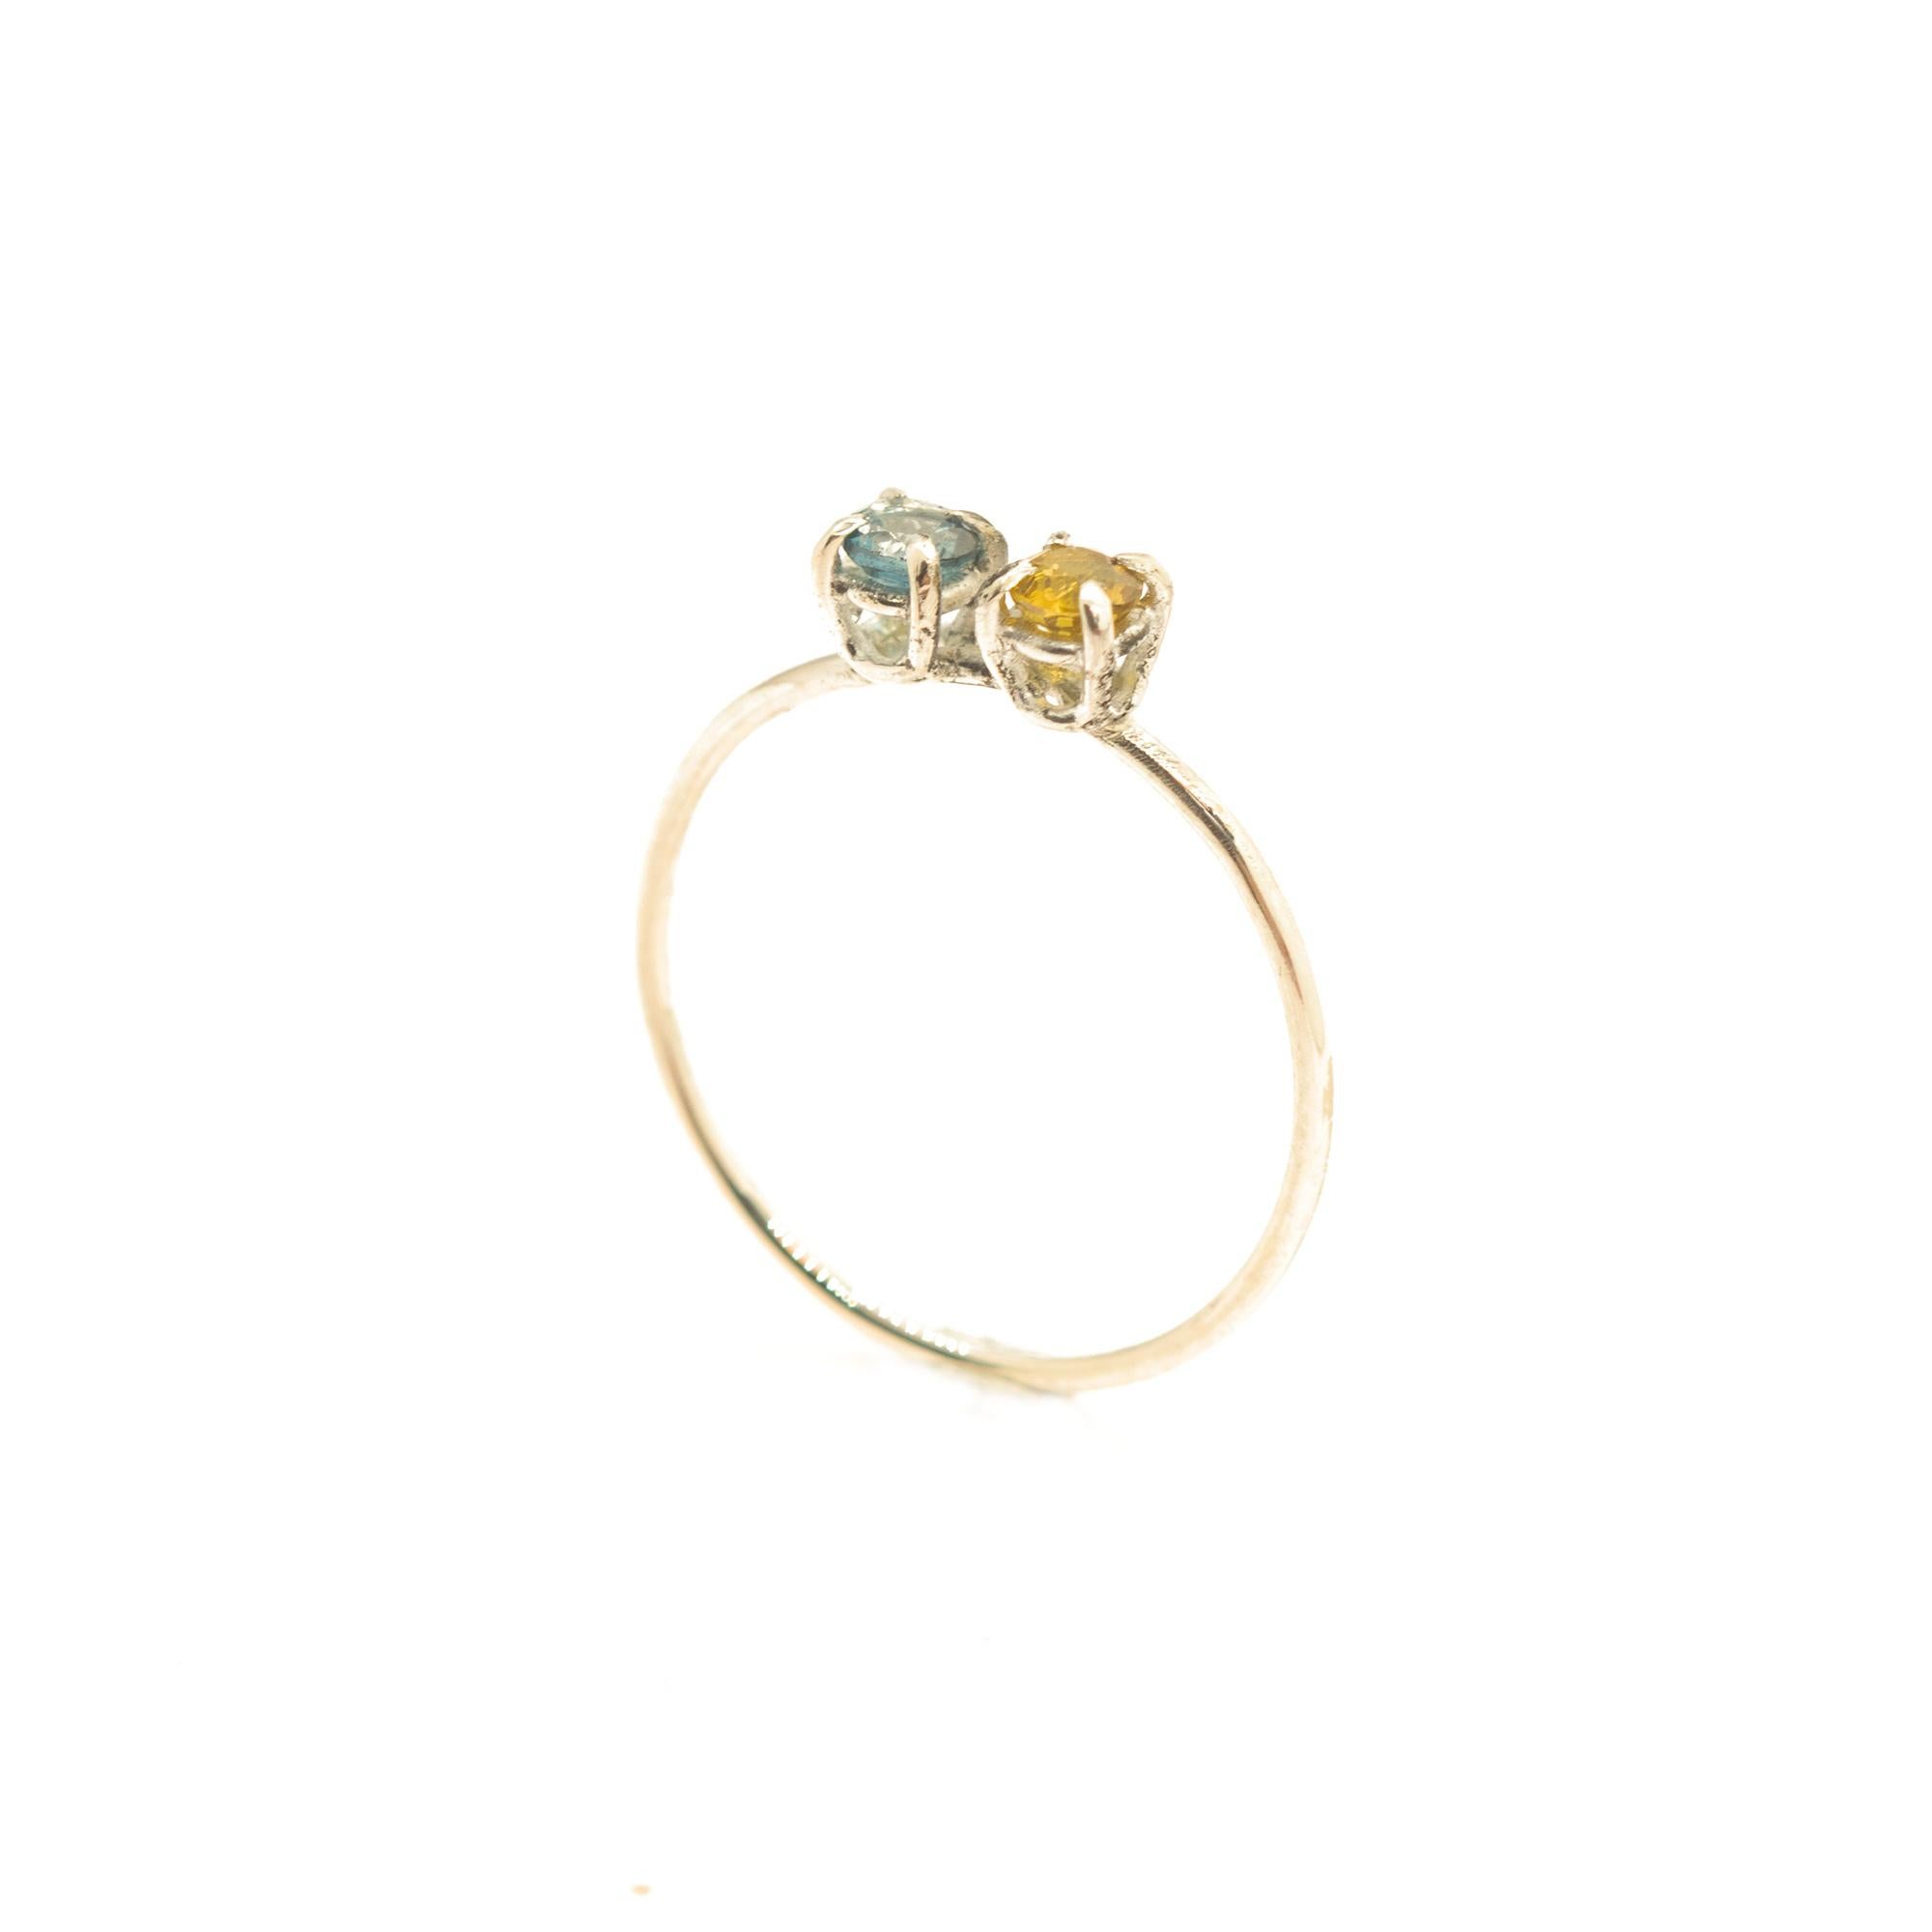 Signature INTINI Jewels precious stones jewellery. Modern and elegant ring design in Sterling Silver for a everyday use.

• Sterling Silver 925
• London Blue Topaz, brilliant round cut, 3.5 mm, 0.5 carats
• Yellow Sapphire, brilliant round cut, 3.5